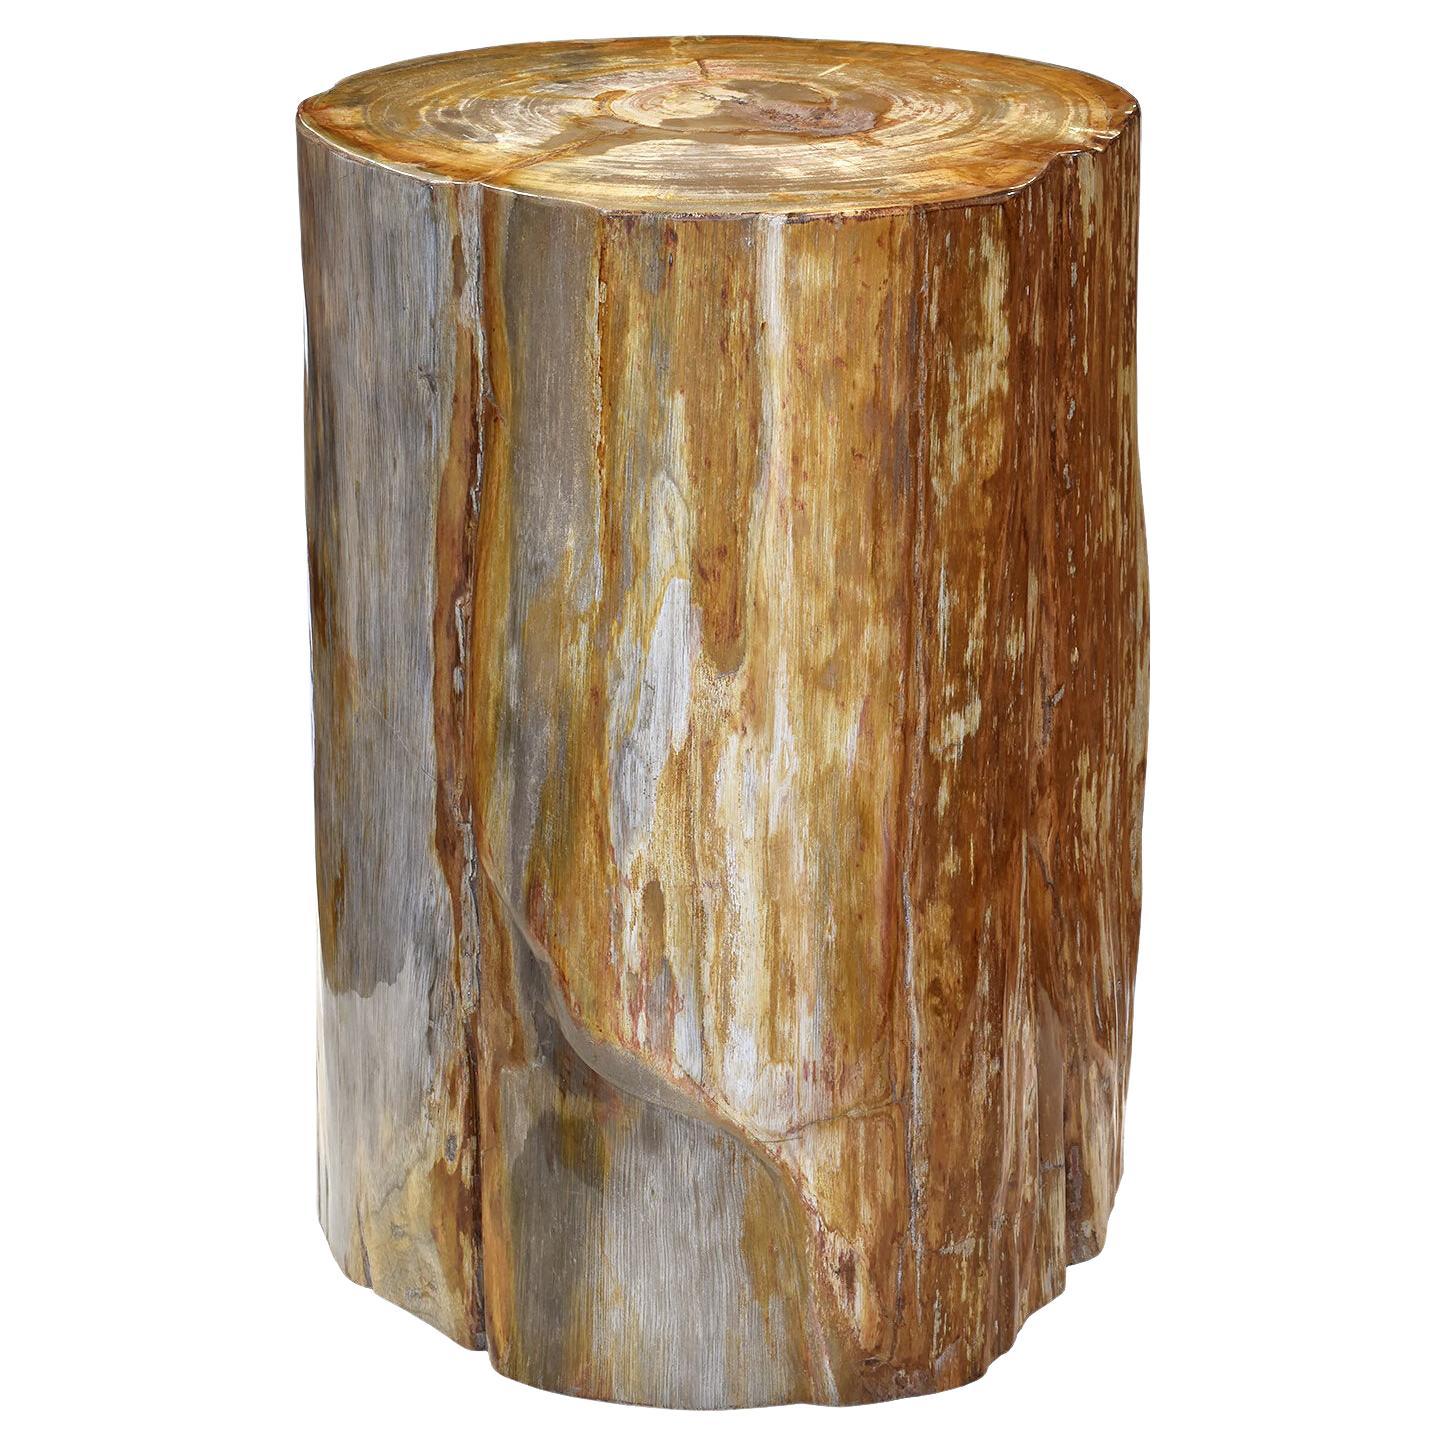 Petrified Wood Stool, Side Table or Low Pedestal, Indonesia